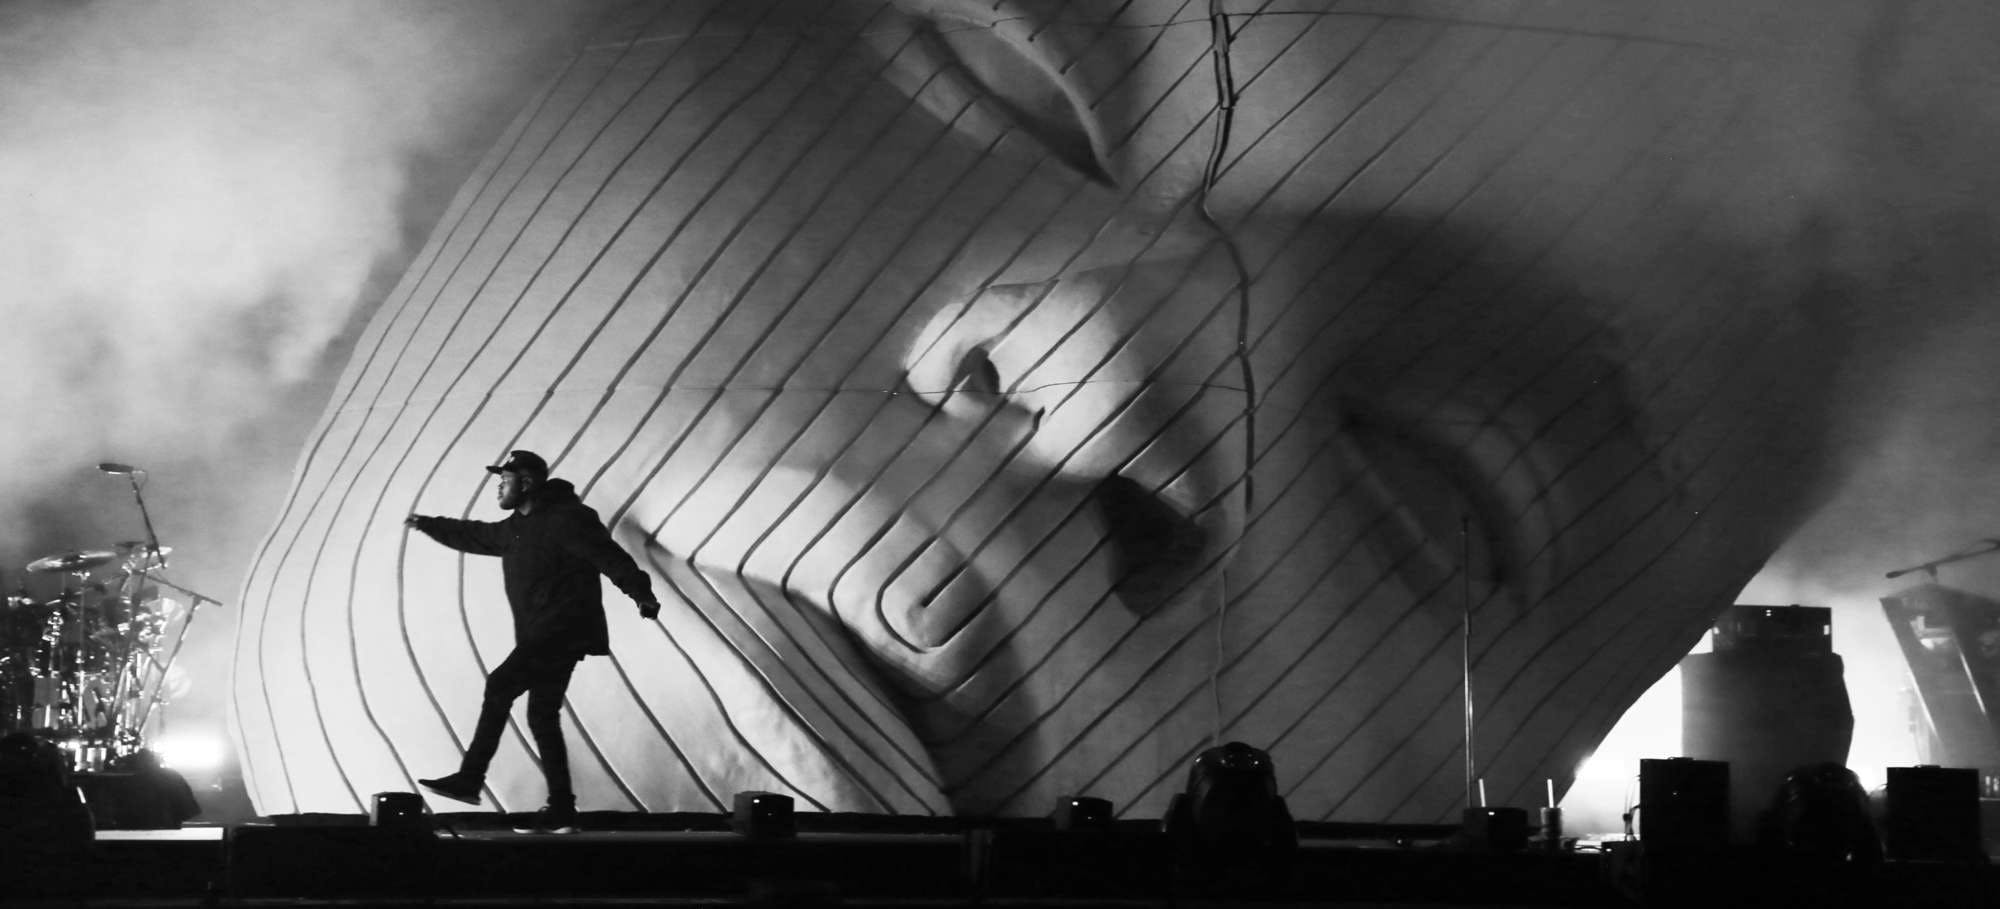 Black and white image of Es Devlin's set design for The Weeknd featuring a backdrop of his face